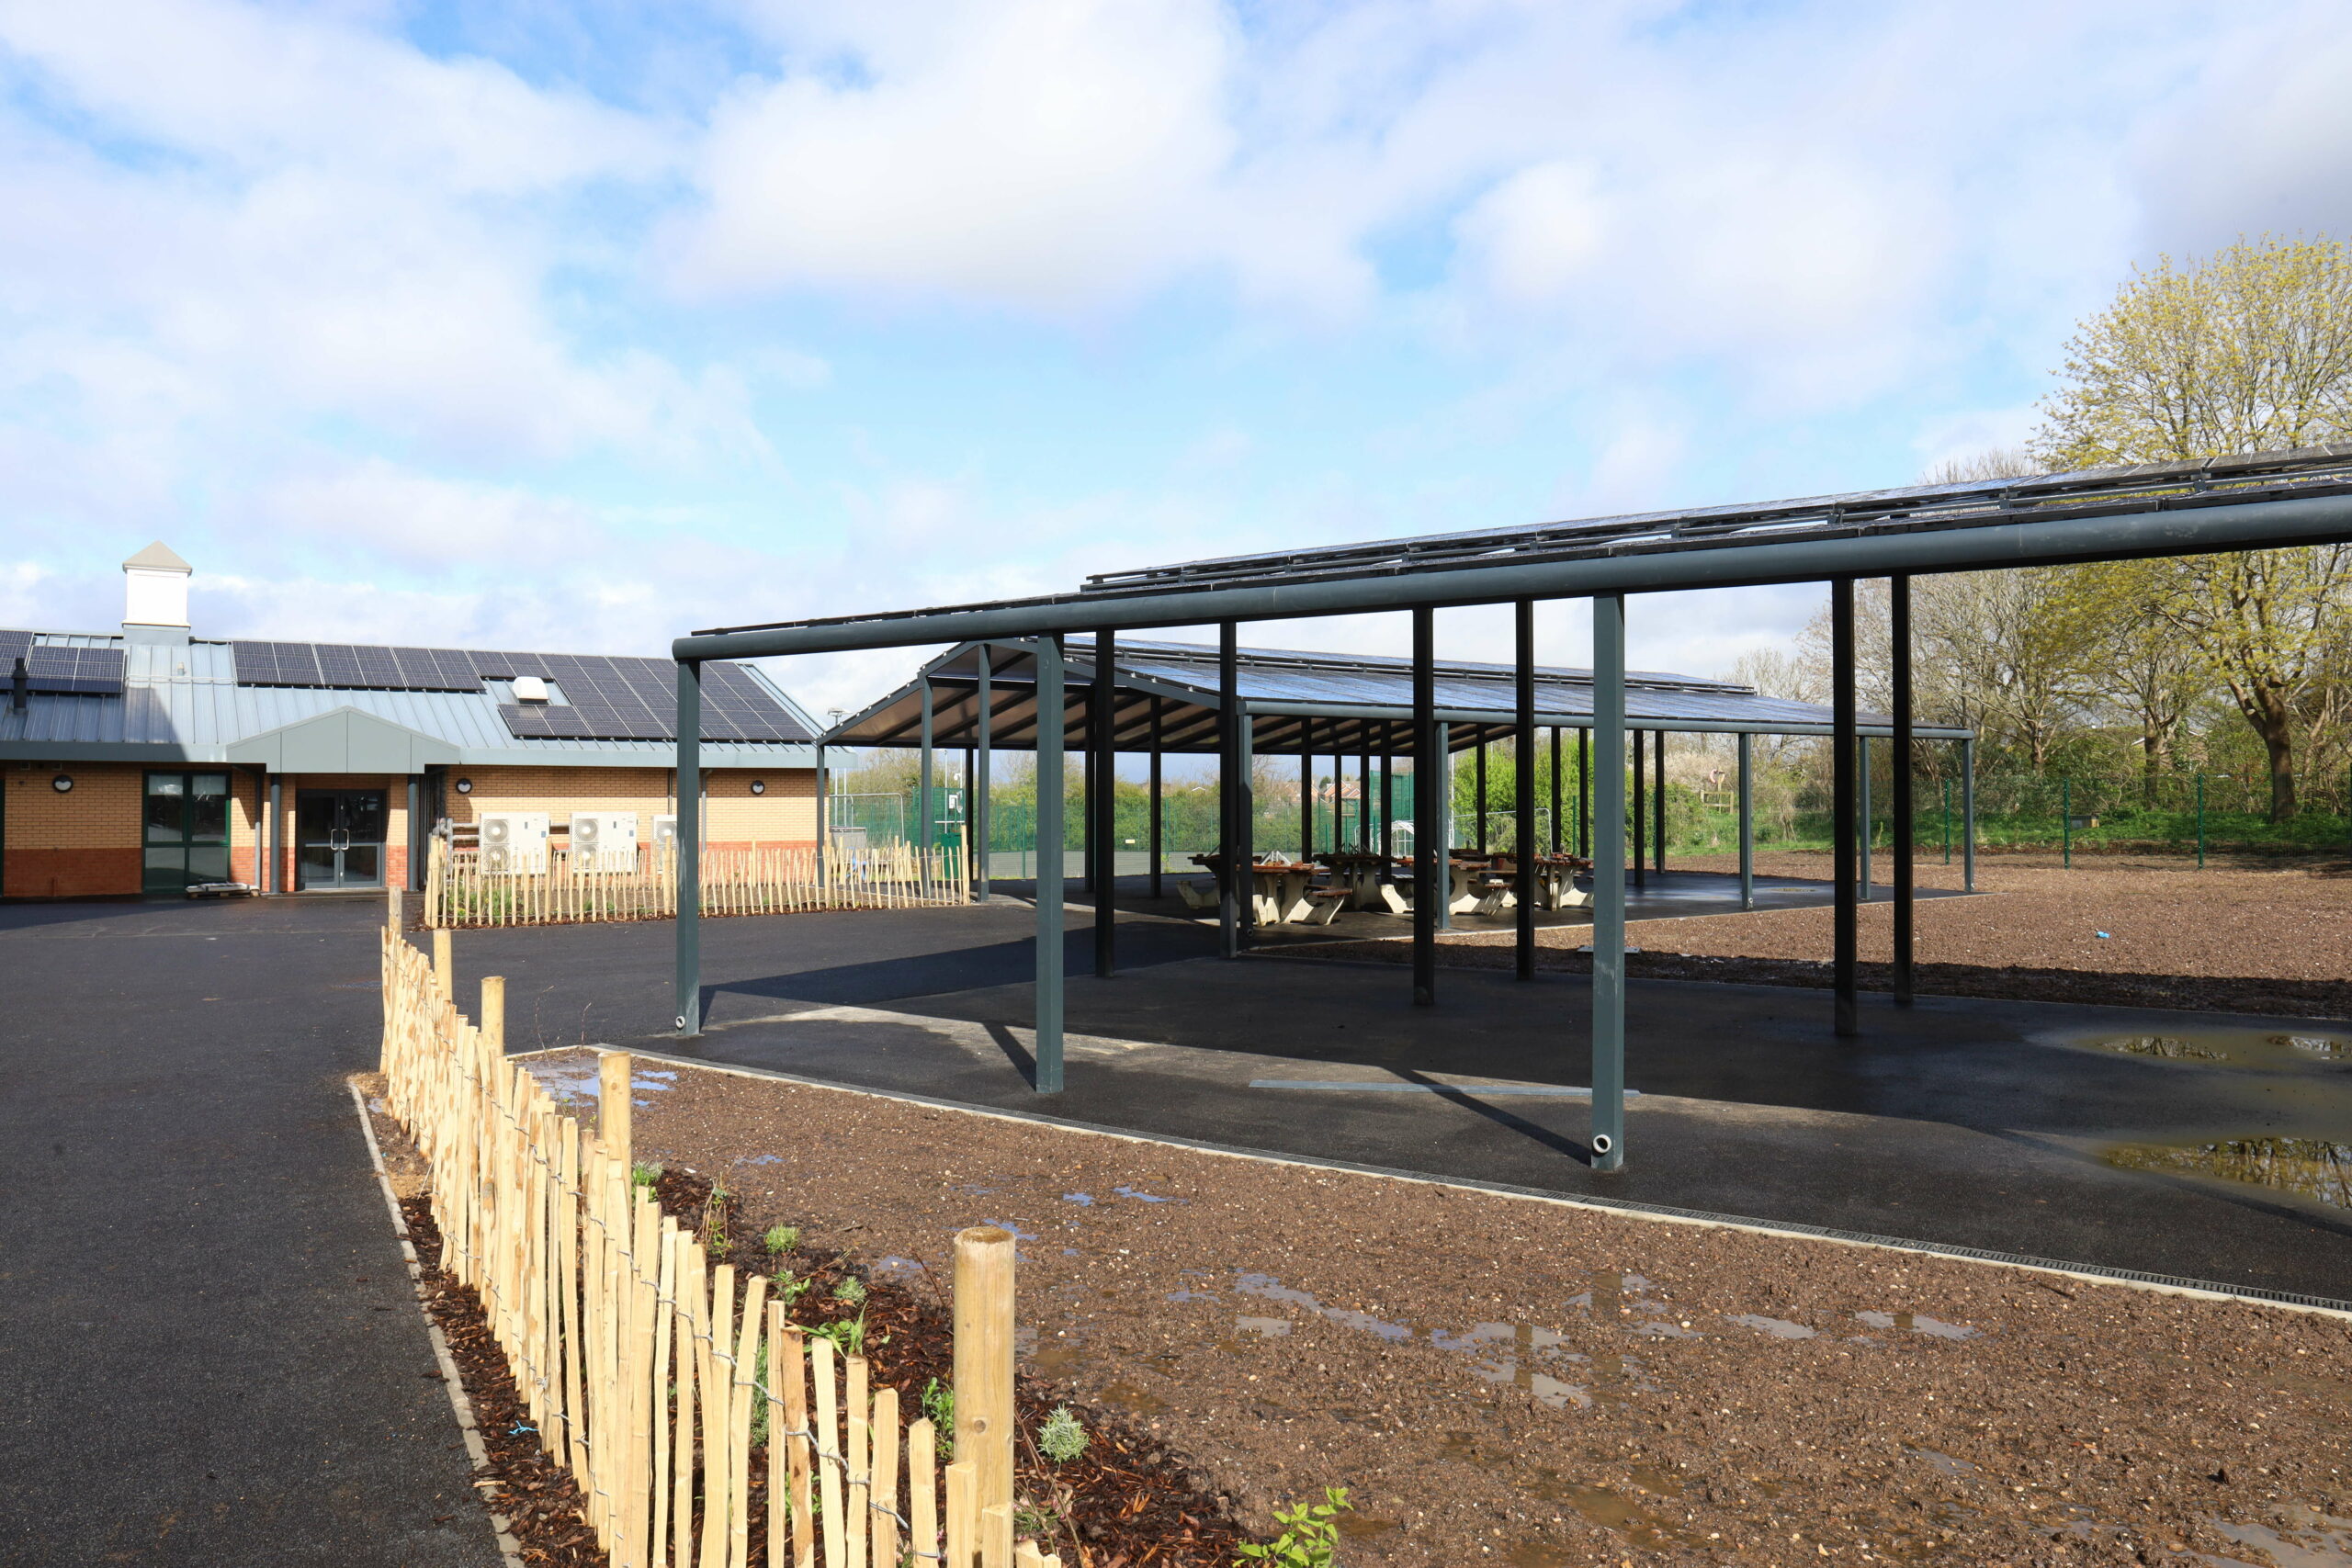 A side-on view of the two PV panel canopies at Southam College